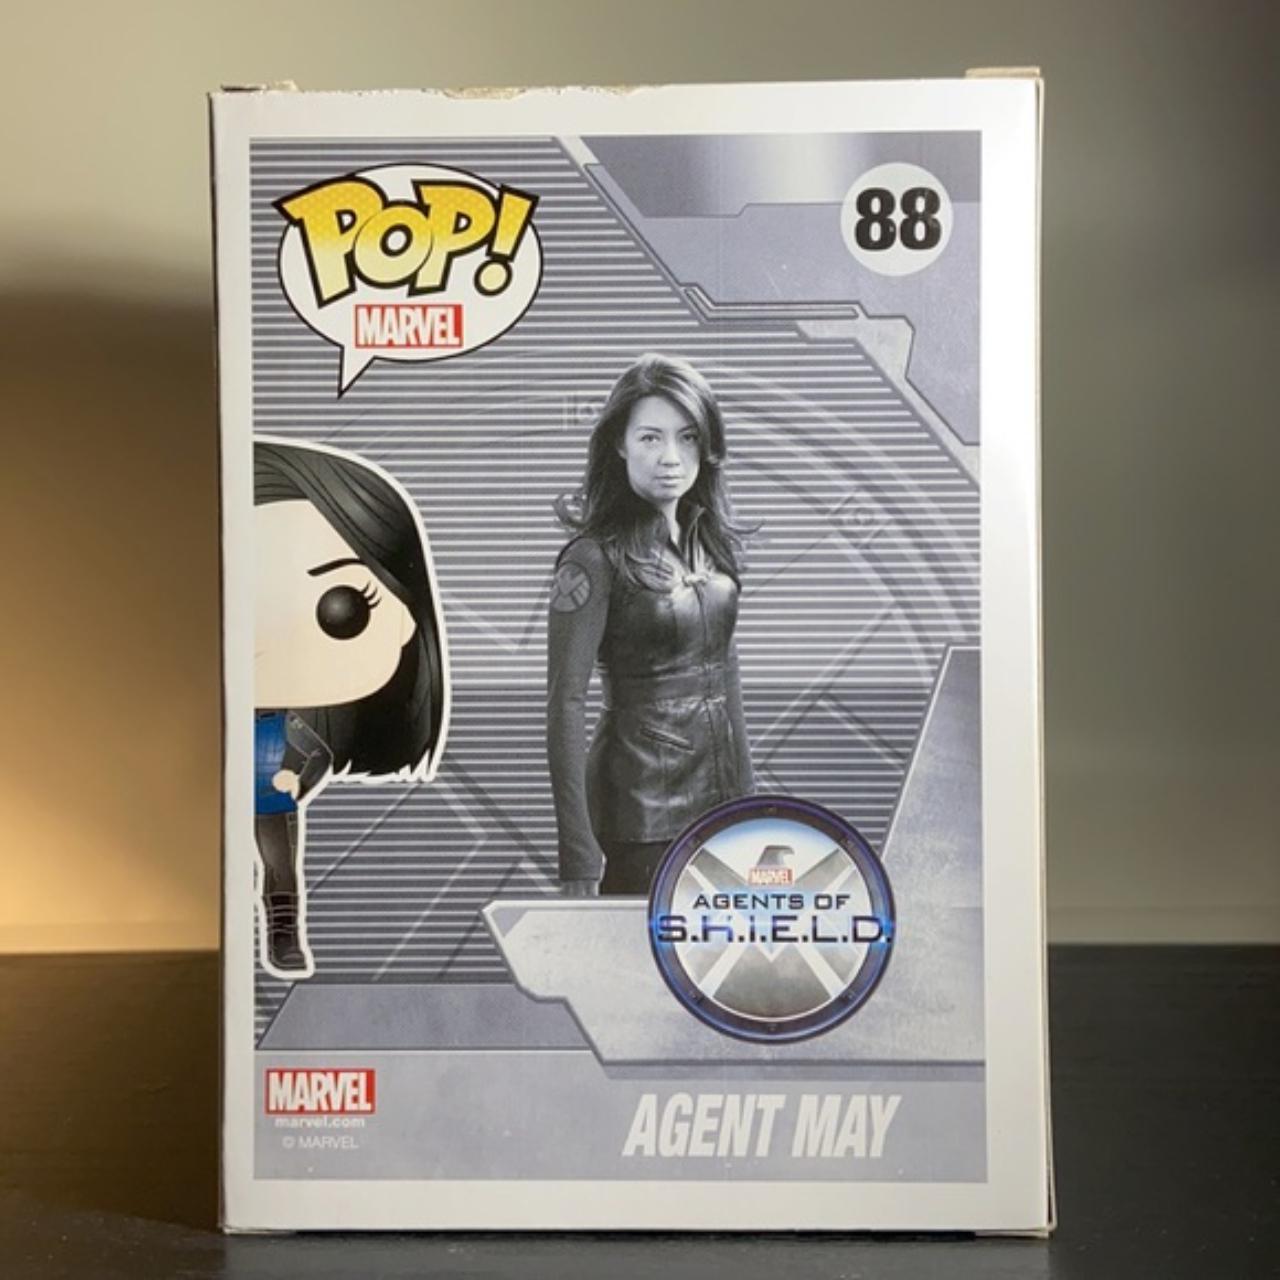 Product Image 2 - Agent May
Type: Vinyl Art Toys
Brand: